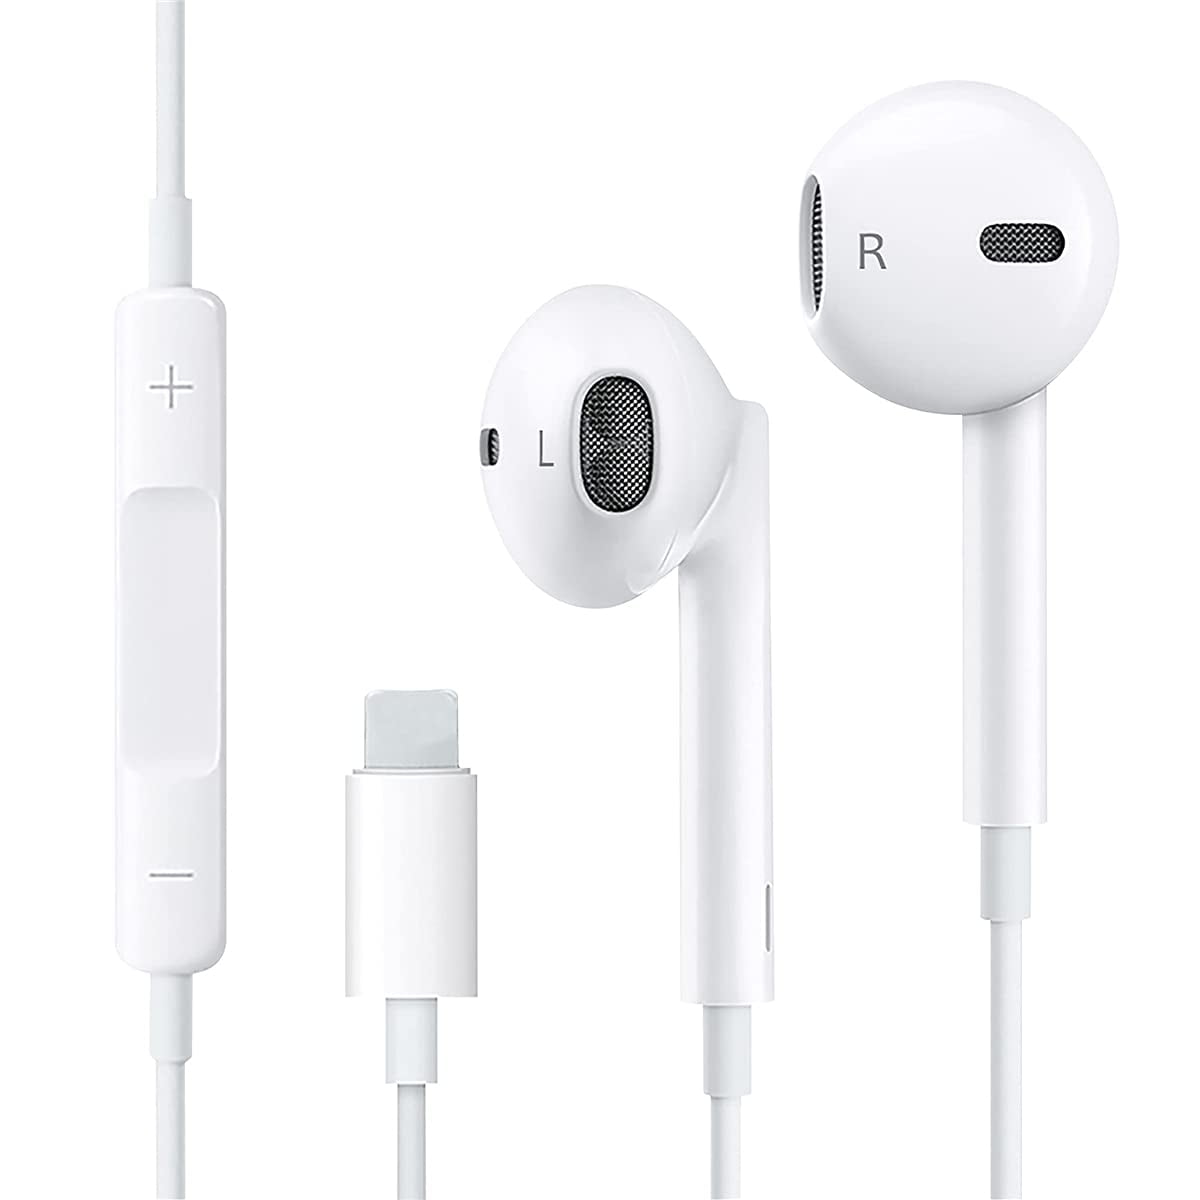 Lighting Connector Earbuds Earphone Wired Headphones Headset with Mic and Volume Control,Compatible with Apple iPhone 11 Pro Max/Xs Max/XR/X/7/8/8 Plus Plug and Play Distribution Panels 